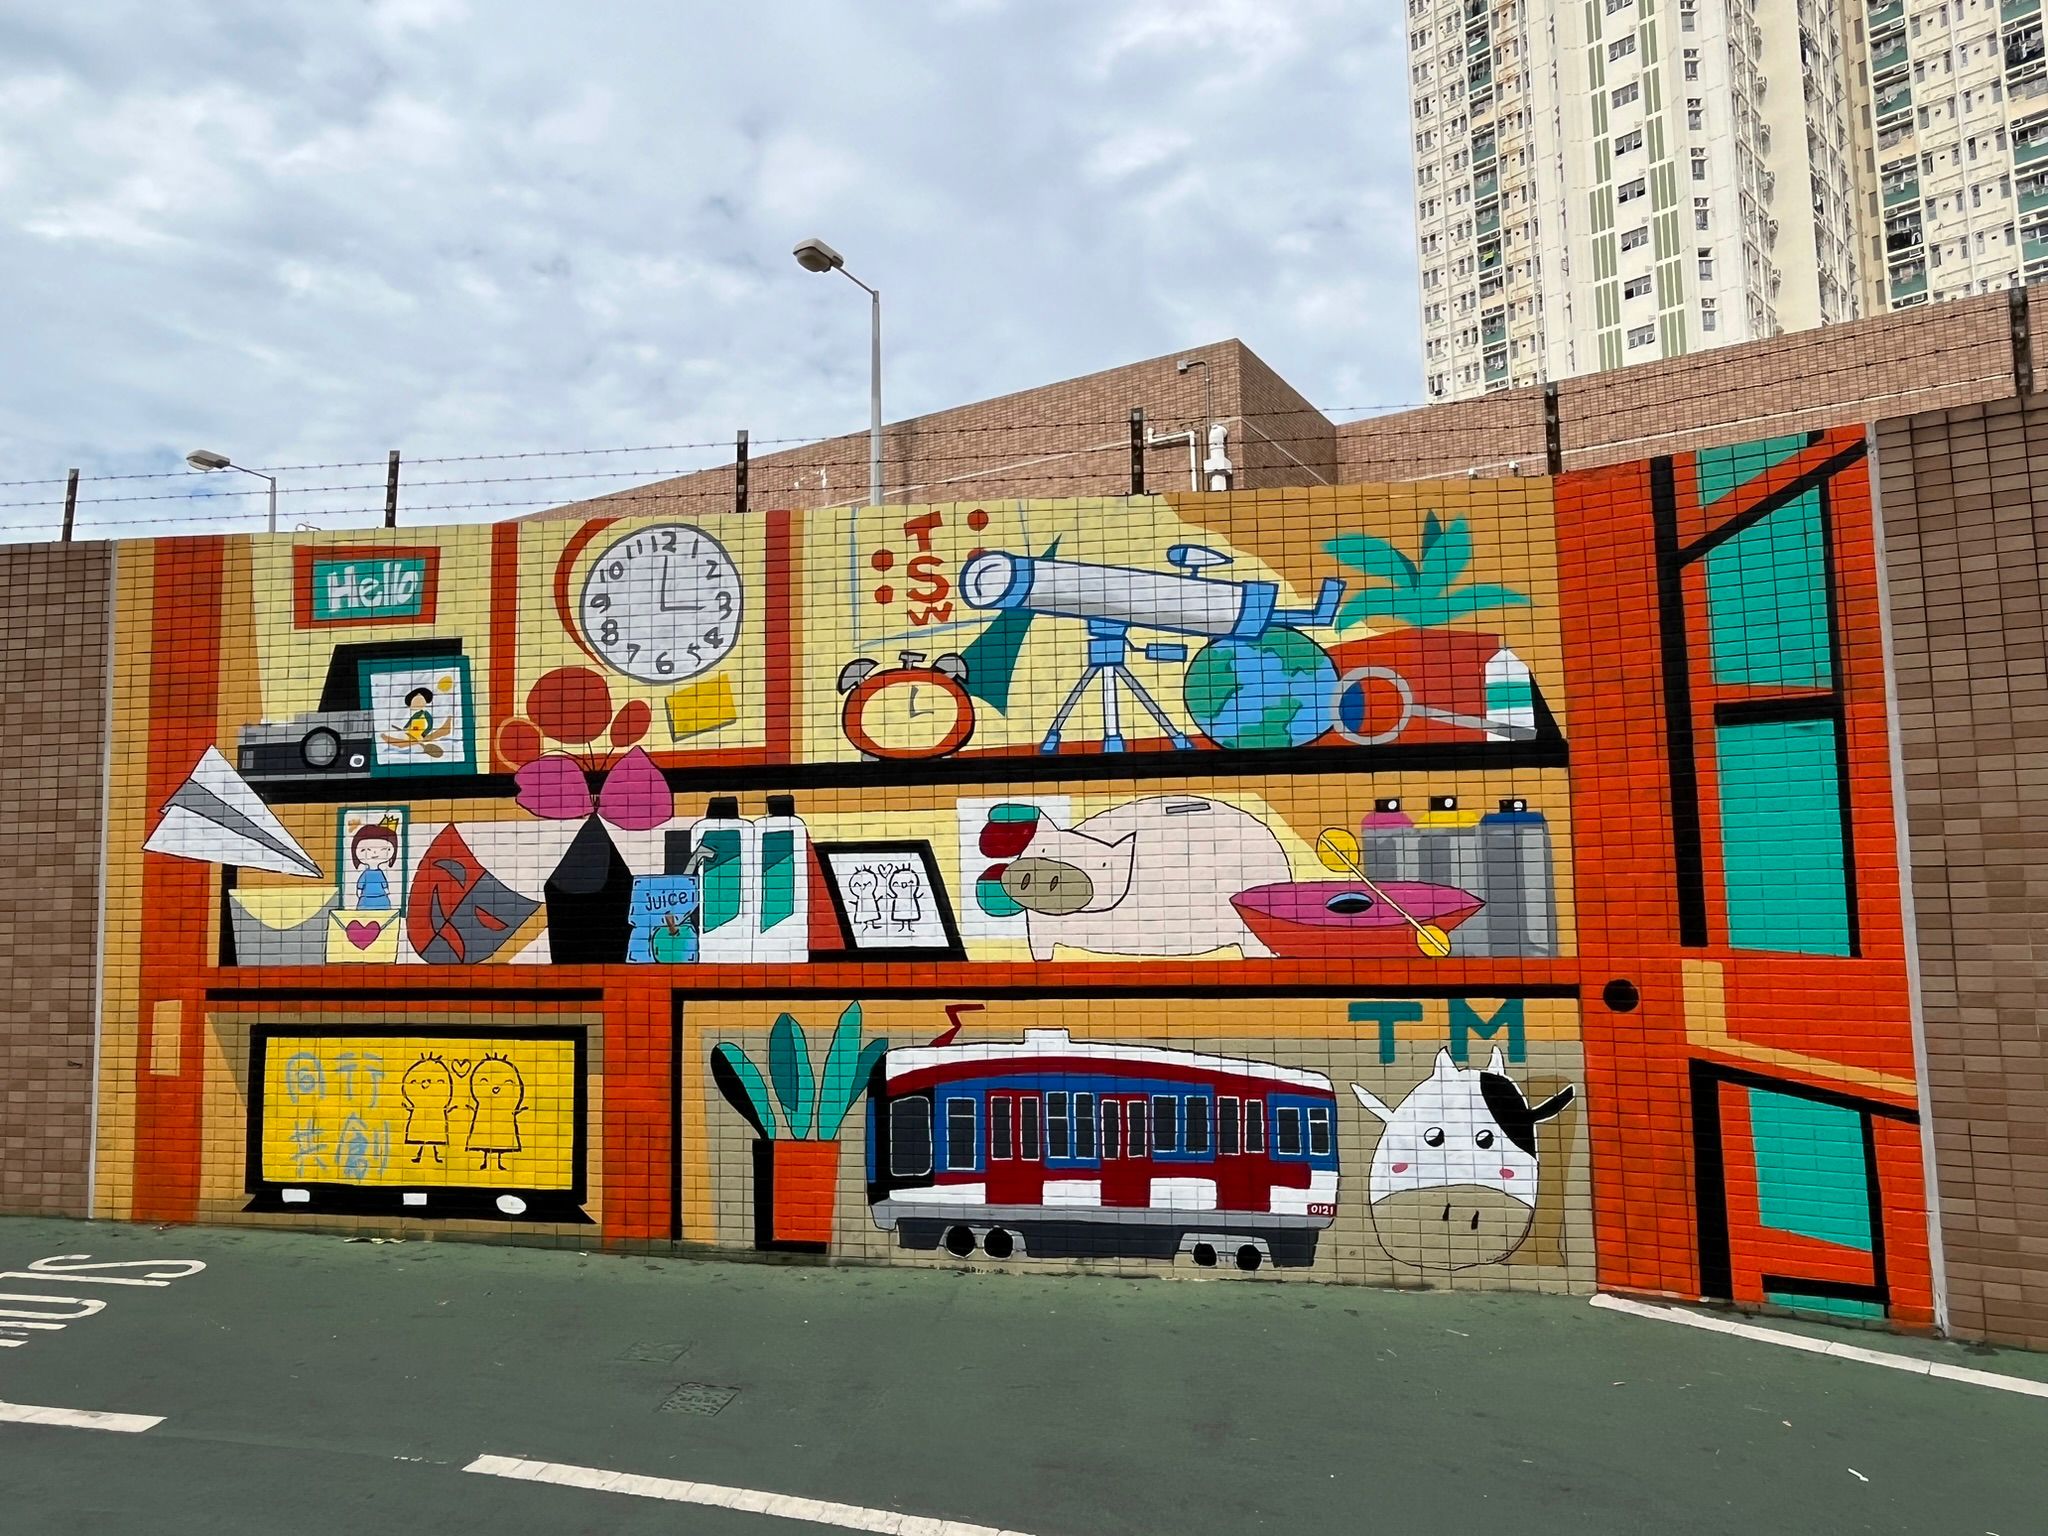 The mural "Life's Treasures in the Locker" was located on the partial exterior wall of Tin Shui Wai Tin Wah Road Sewage Pumping Station. The mural adopted the theme of "lockers," with crowded items inside reflecting the sense of overcrowding experienced by young people when visiting subdivided flats